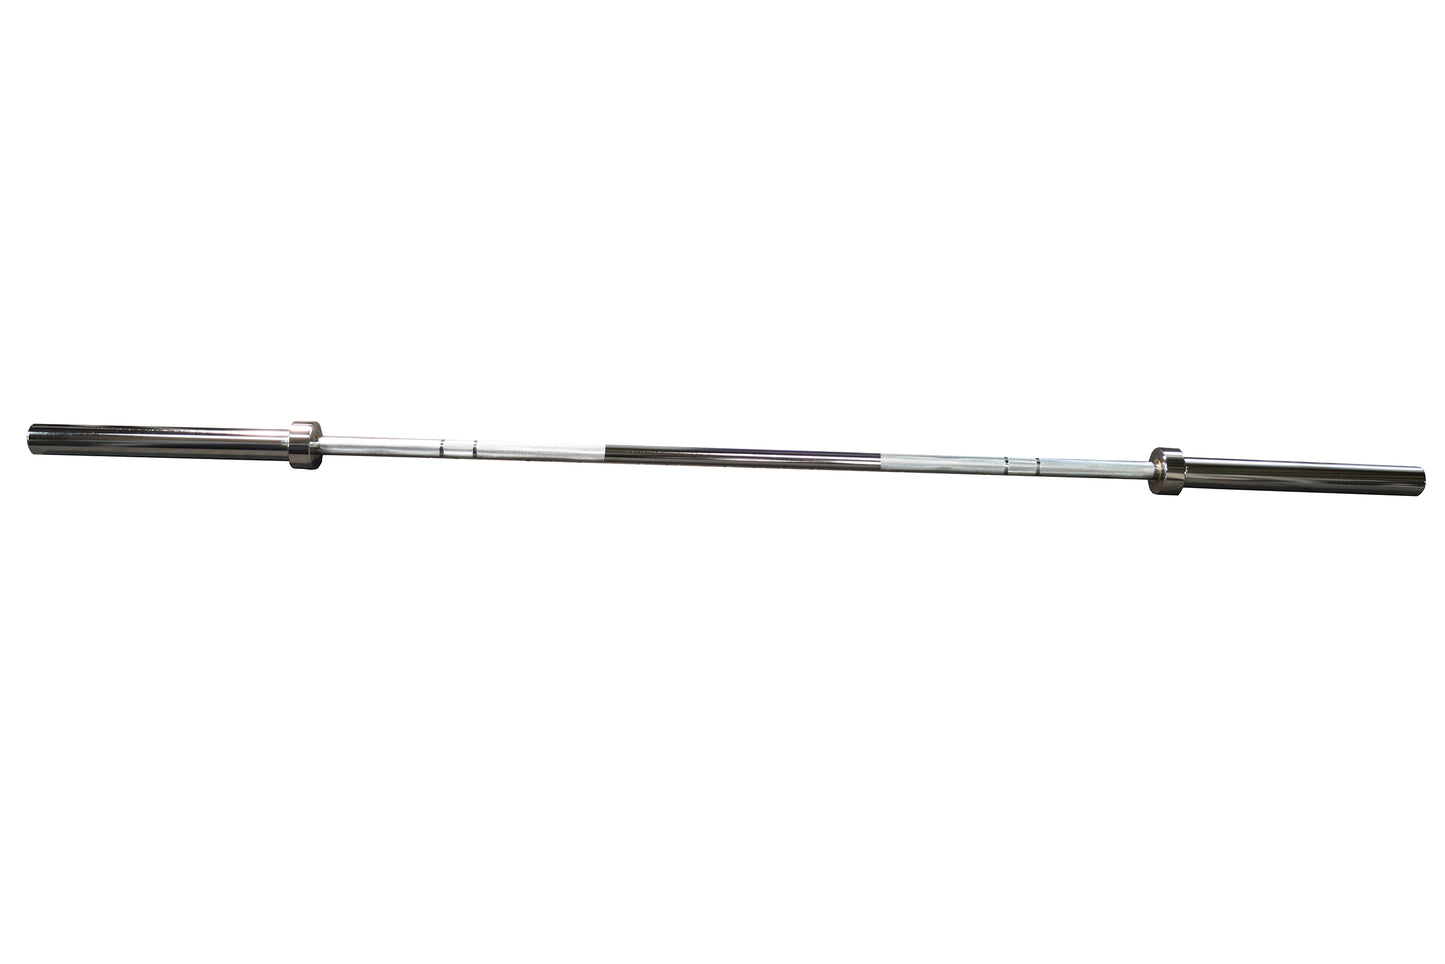 7' Chrome Olympic Weight Bar with 1500 lb capacity (OB1500)